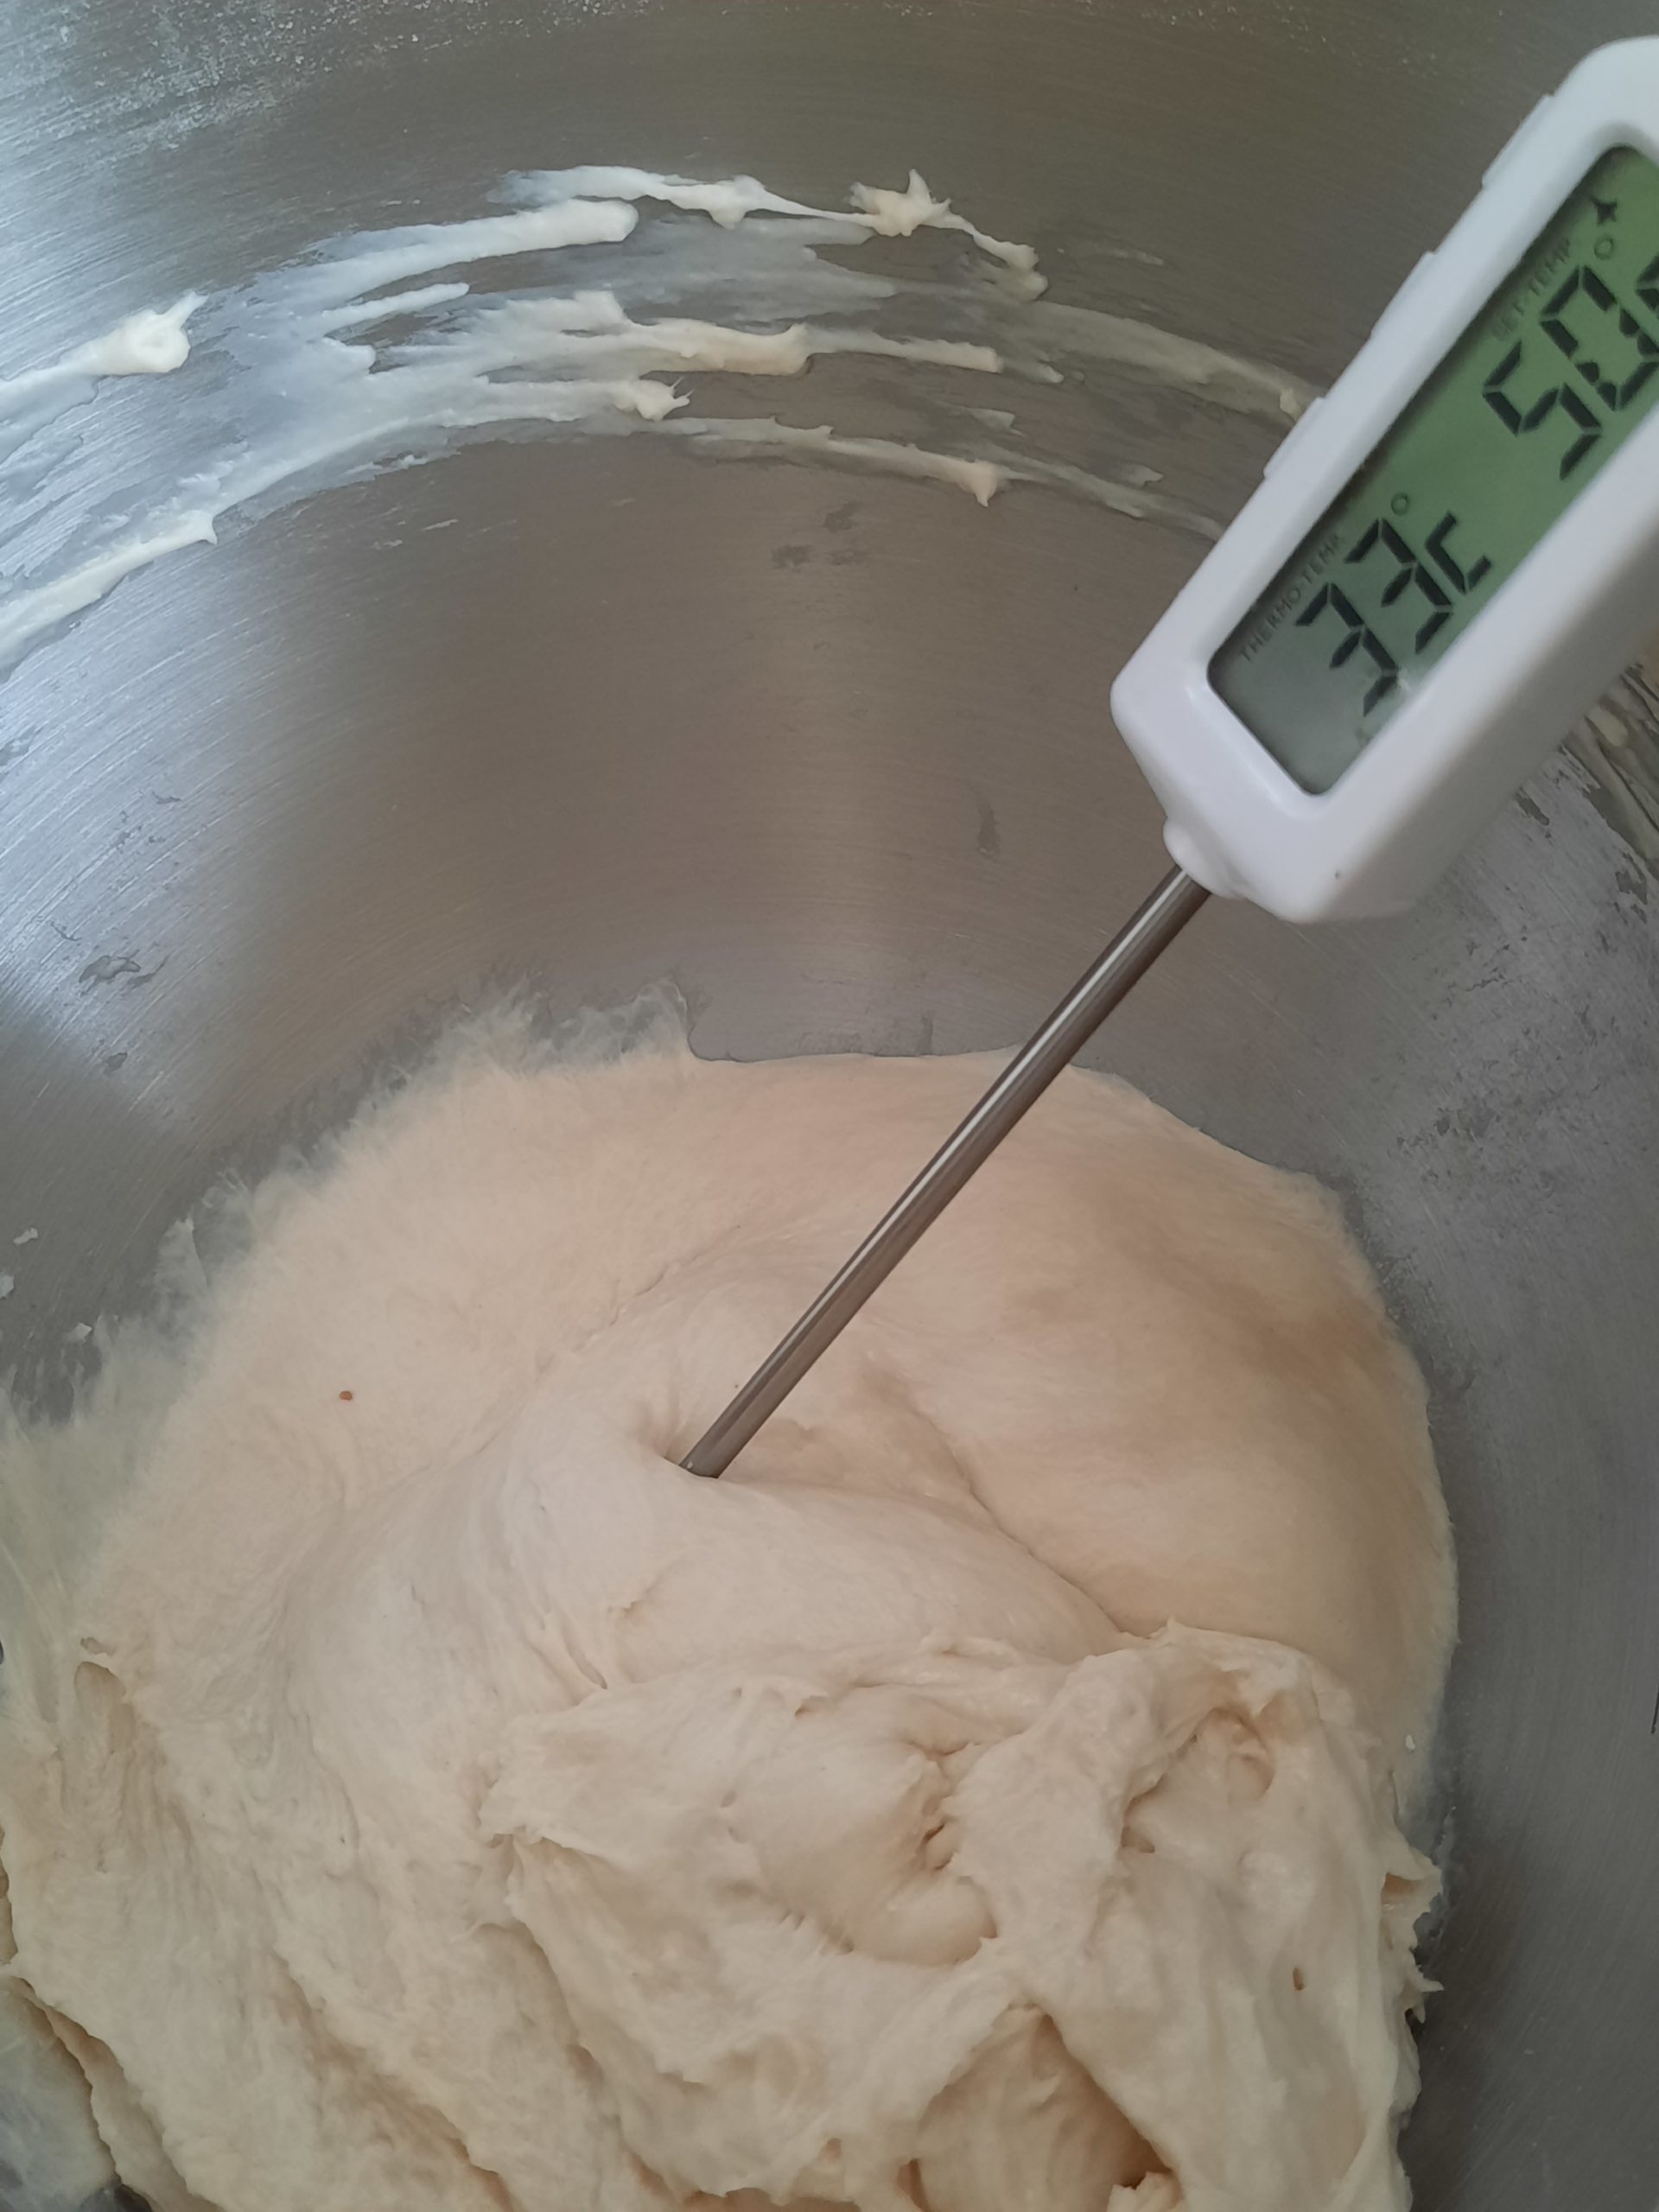 The temperature of the dough after mixing is too high, how to cool down quickly